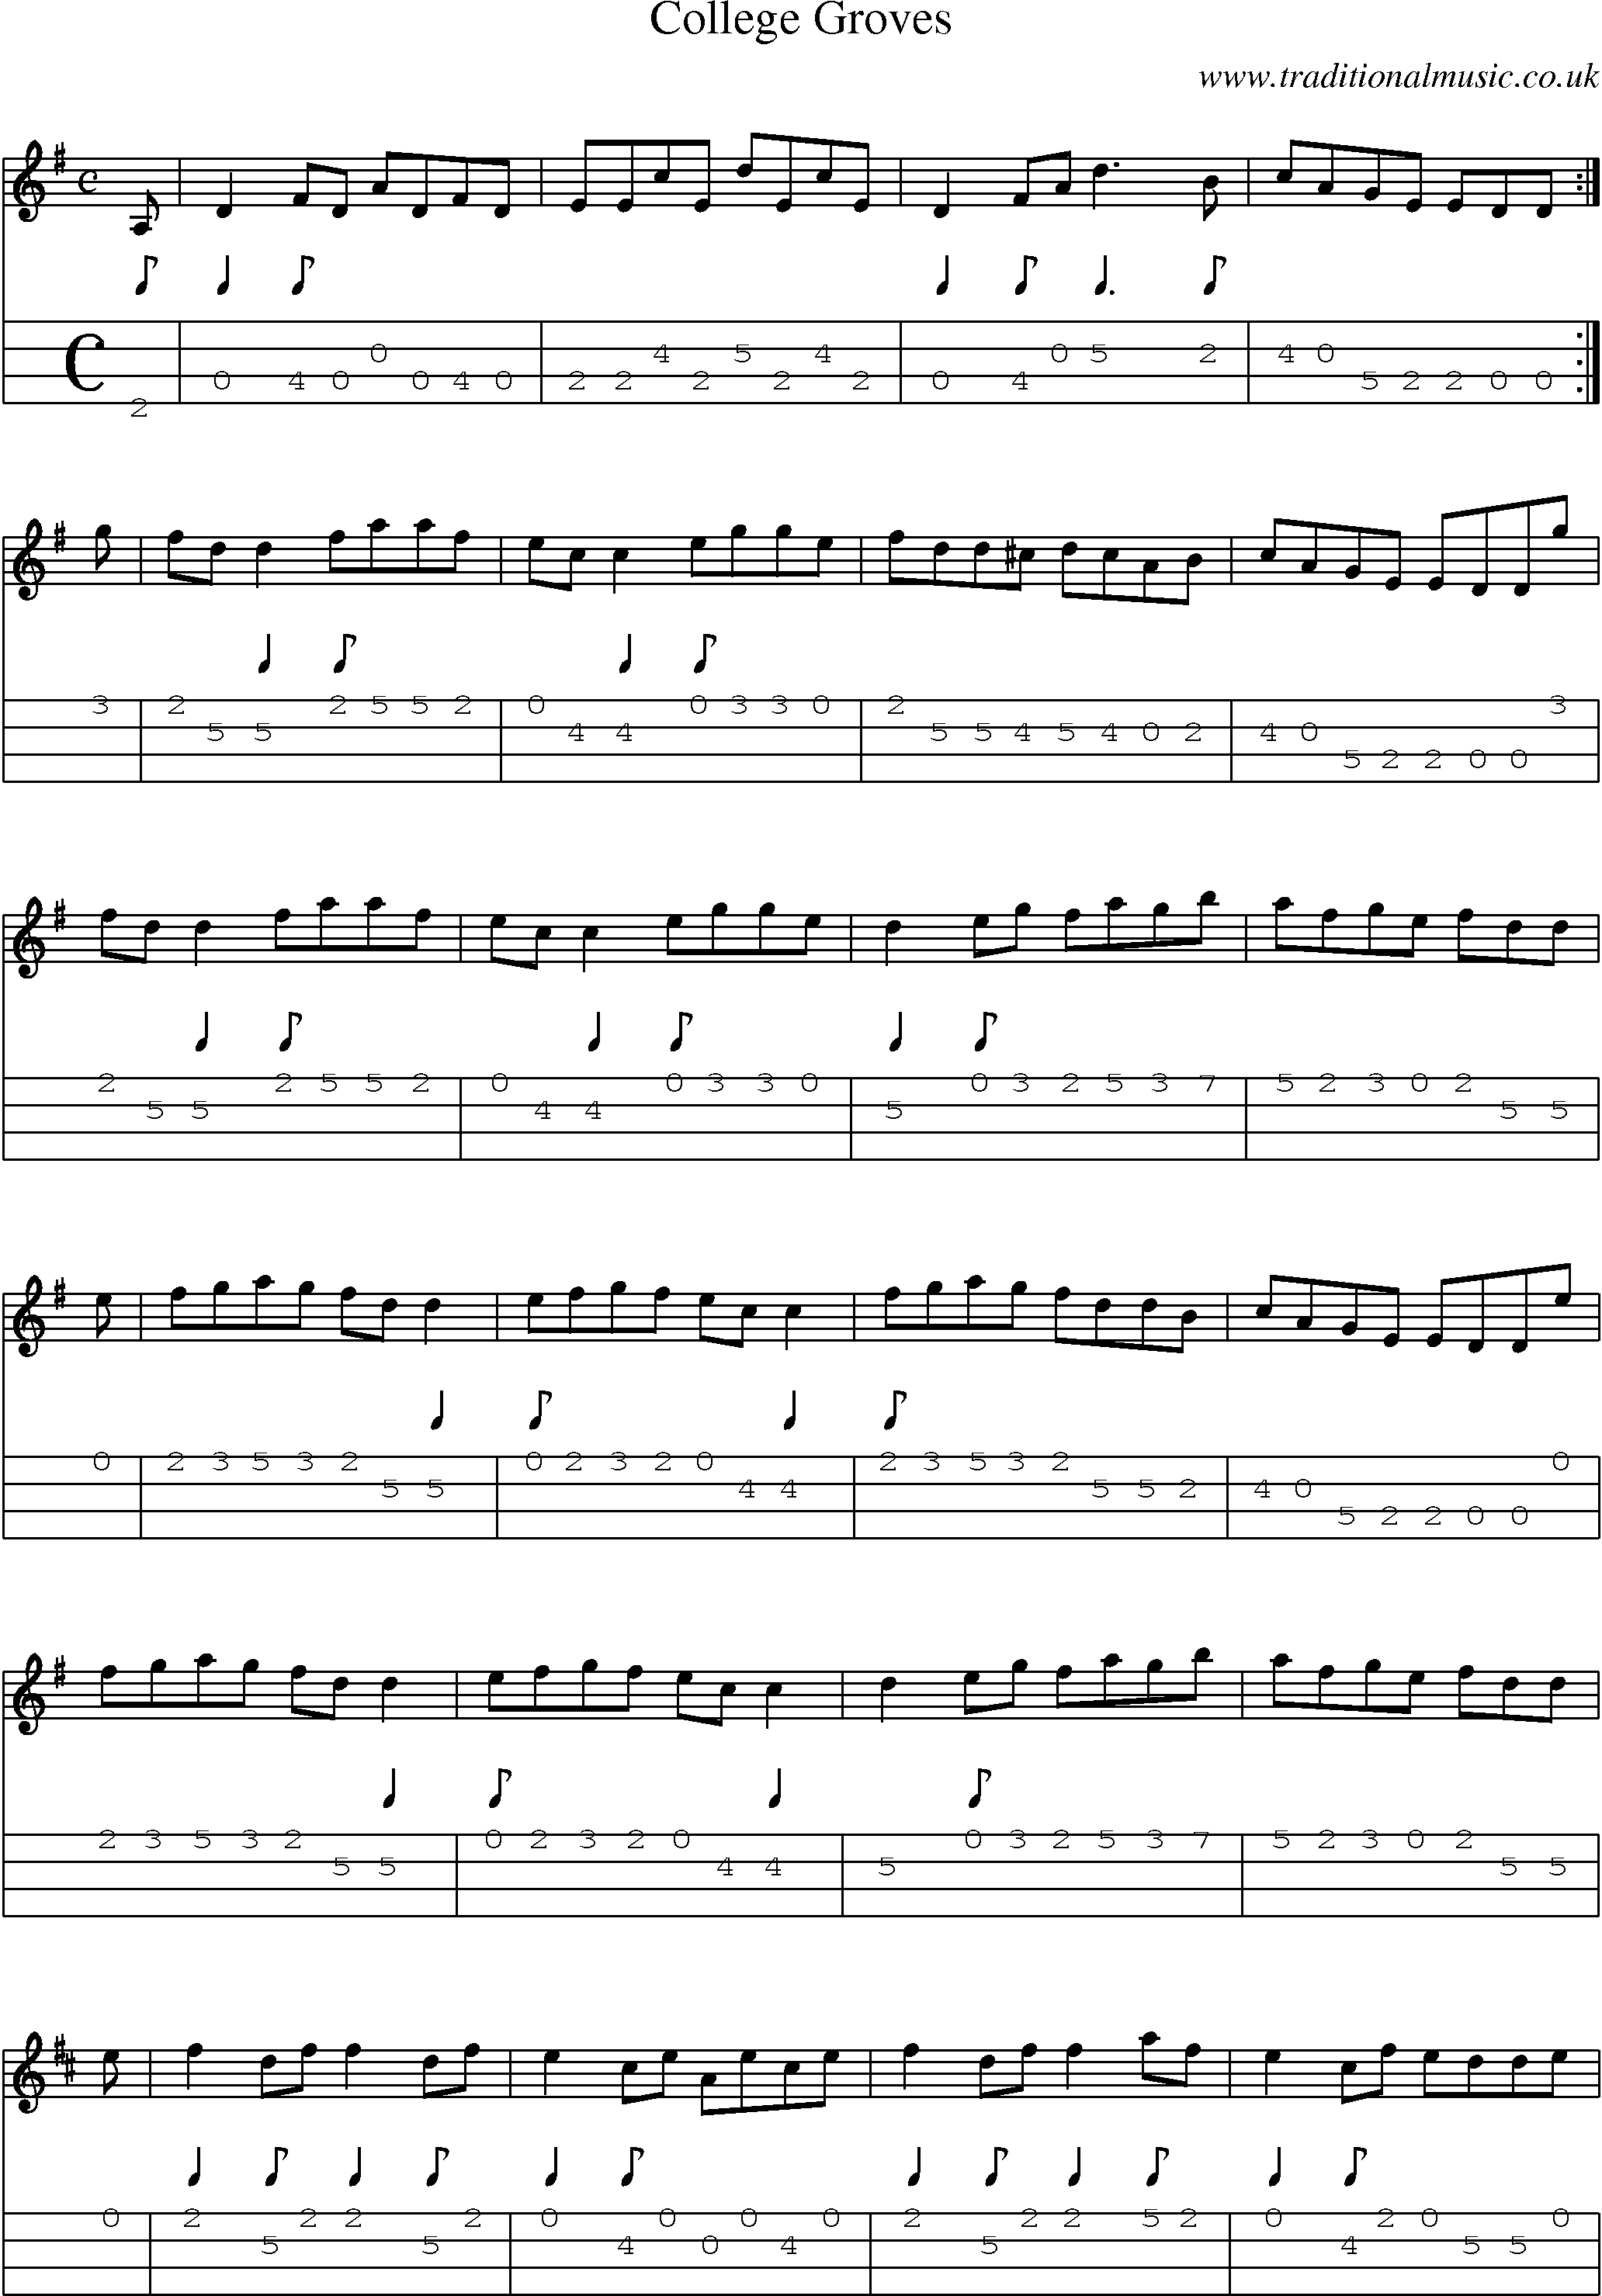 Music Score and Mandolin Tabs for College Groves